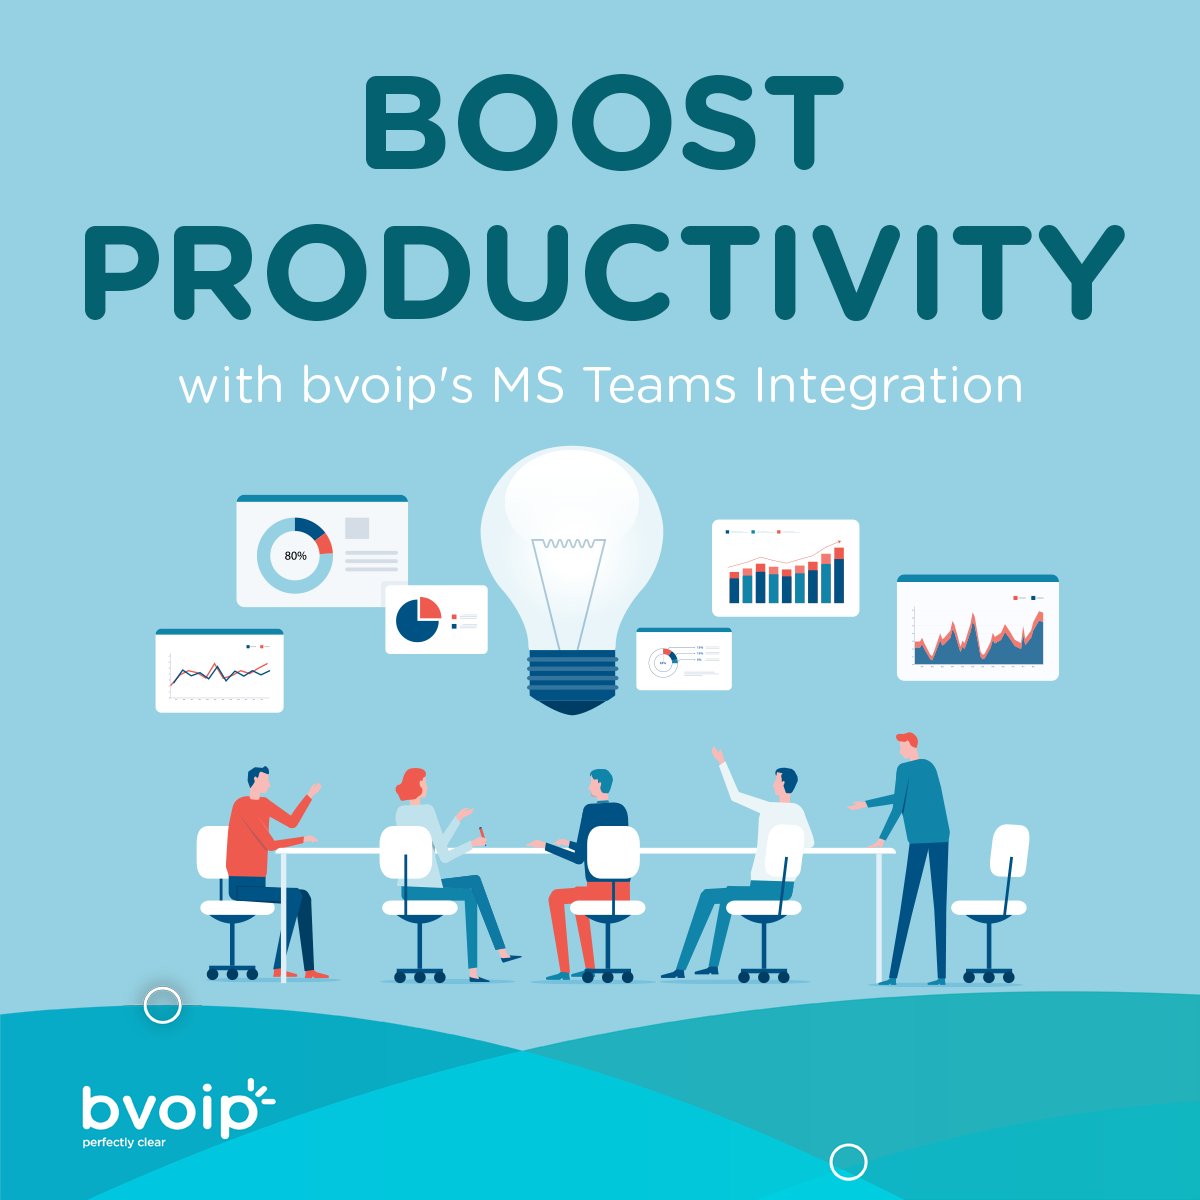 Looking for a communication solution that integrates with MS Teams? Look no further than bvoip! Our integration maximizes your productivity and collaboration with your team. bit.ly/3oMyYle
#bvoip #Integrations #microsoftteams #1stream #MSTeamsIntegration #Collaboration